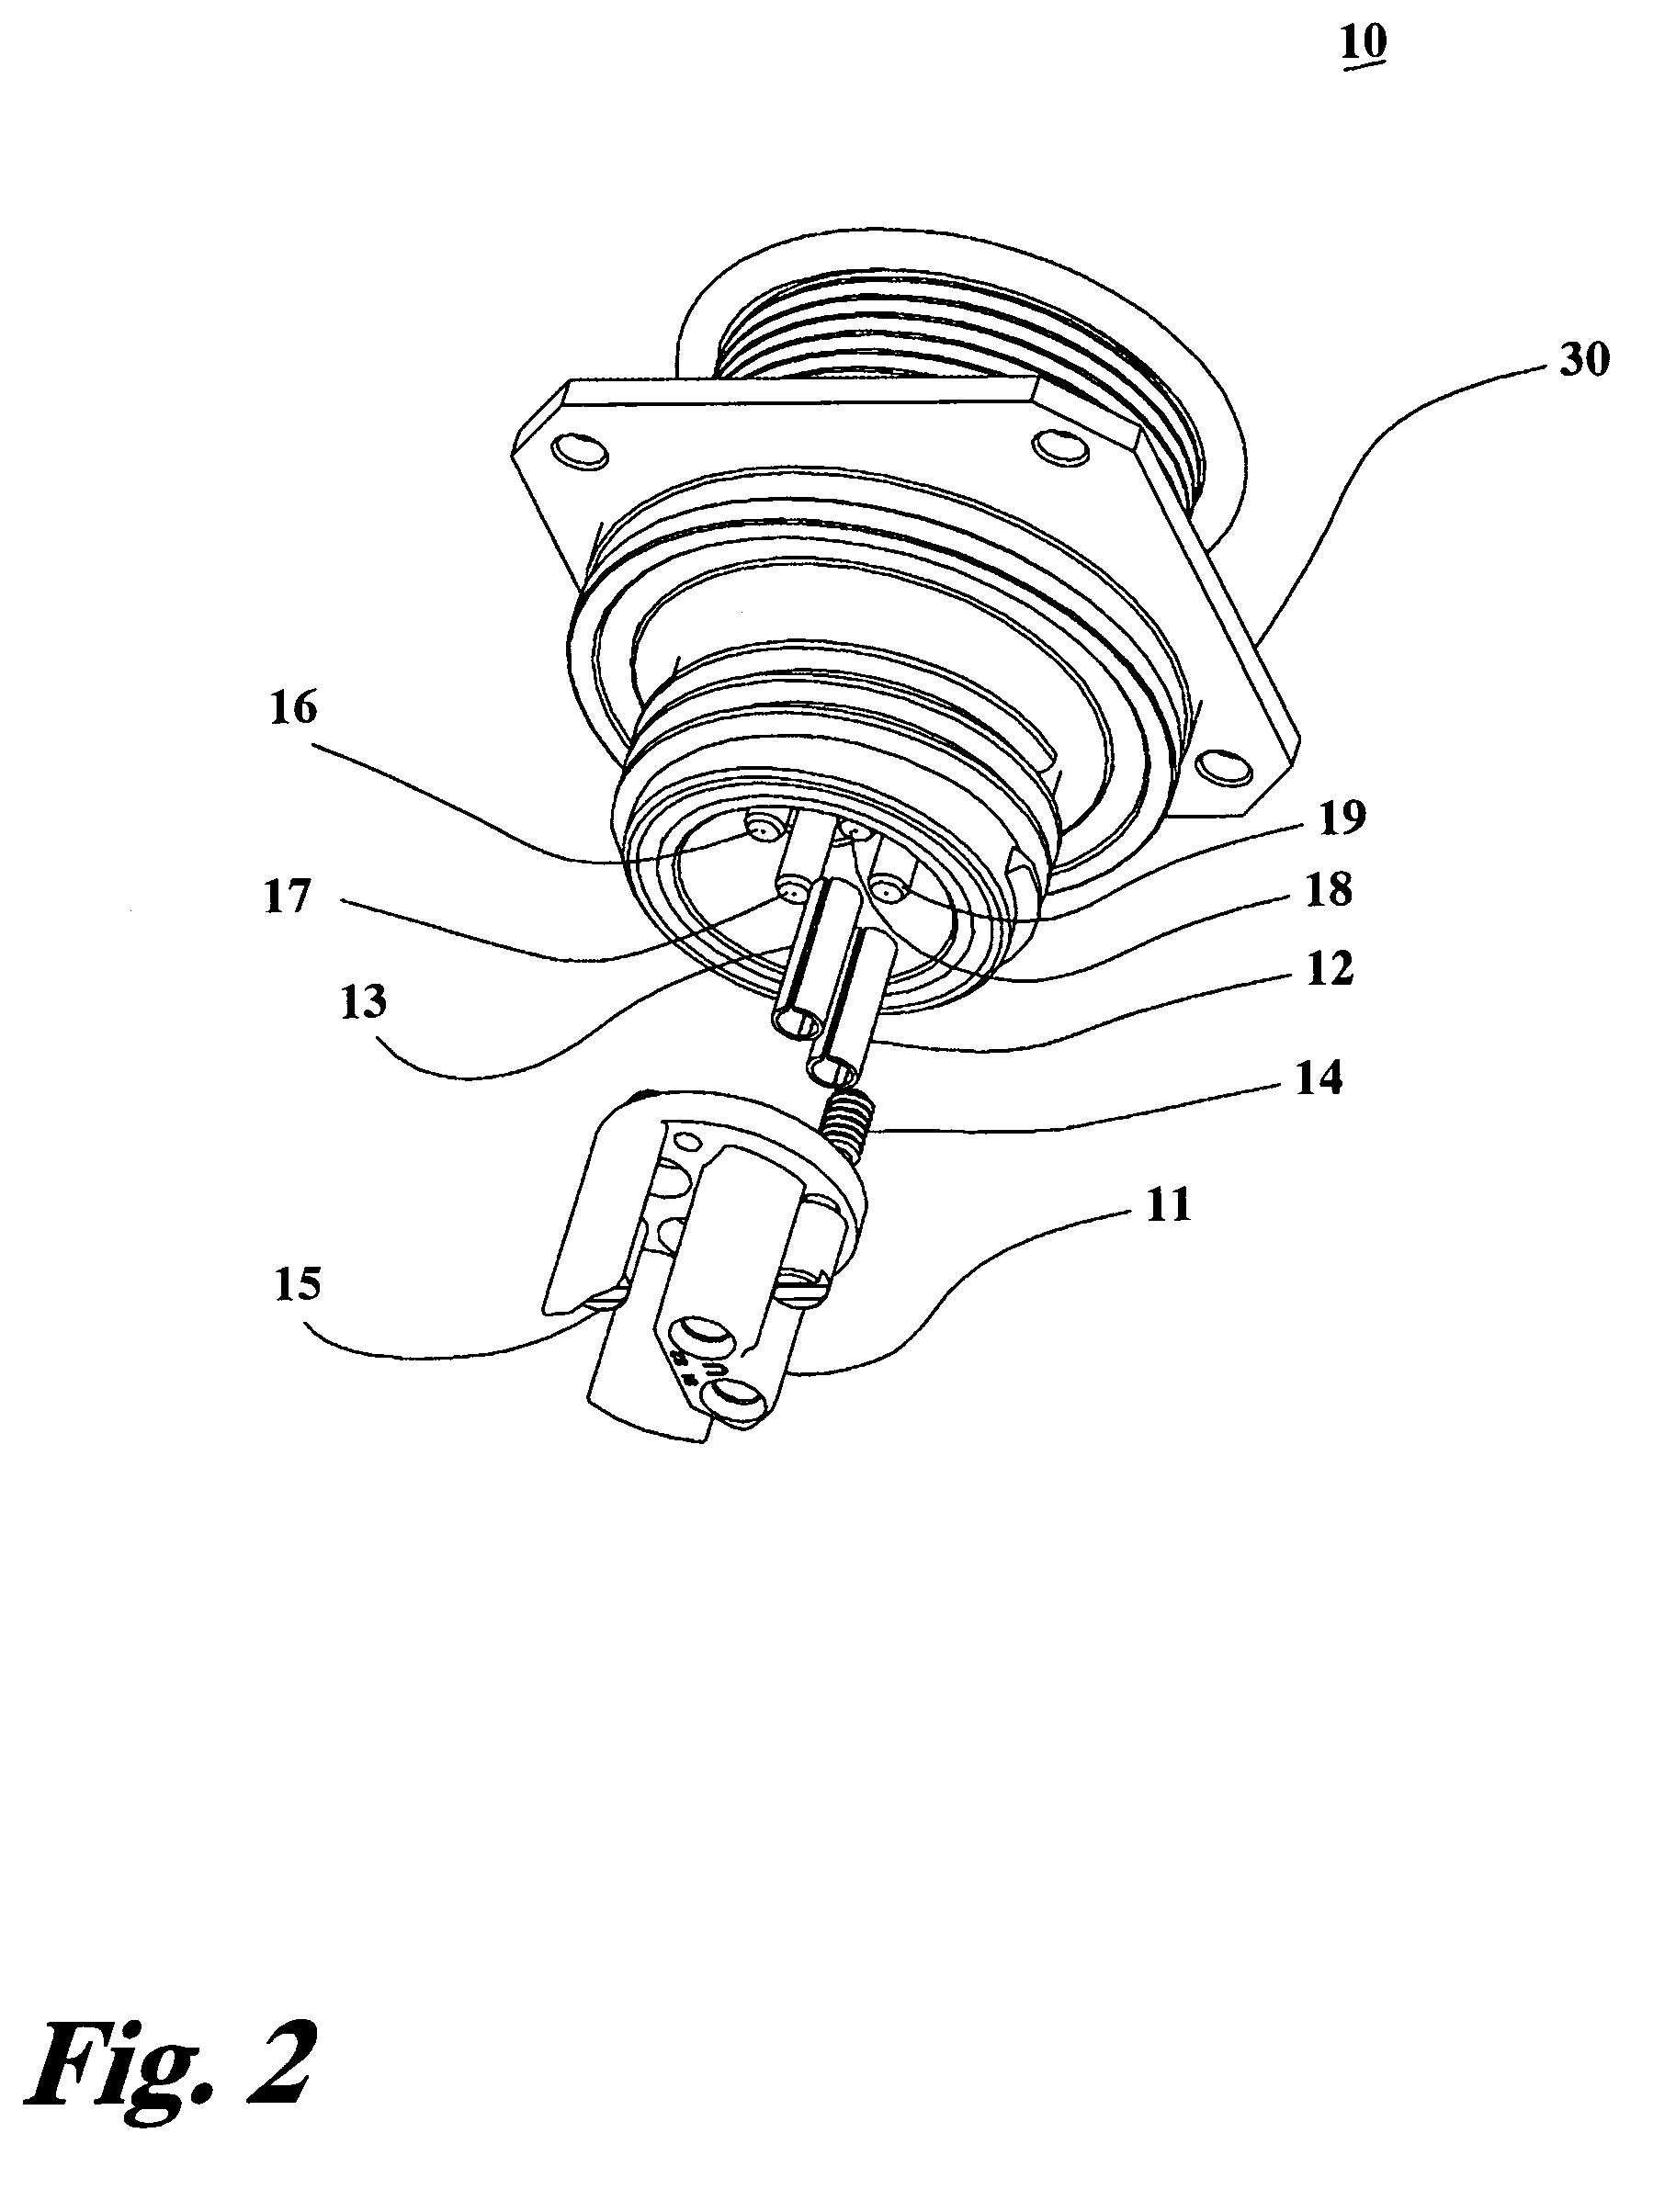 Expanded beam converter for MIL-PRF-83526/17 optical connector